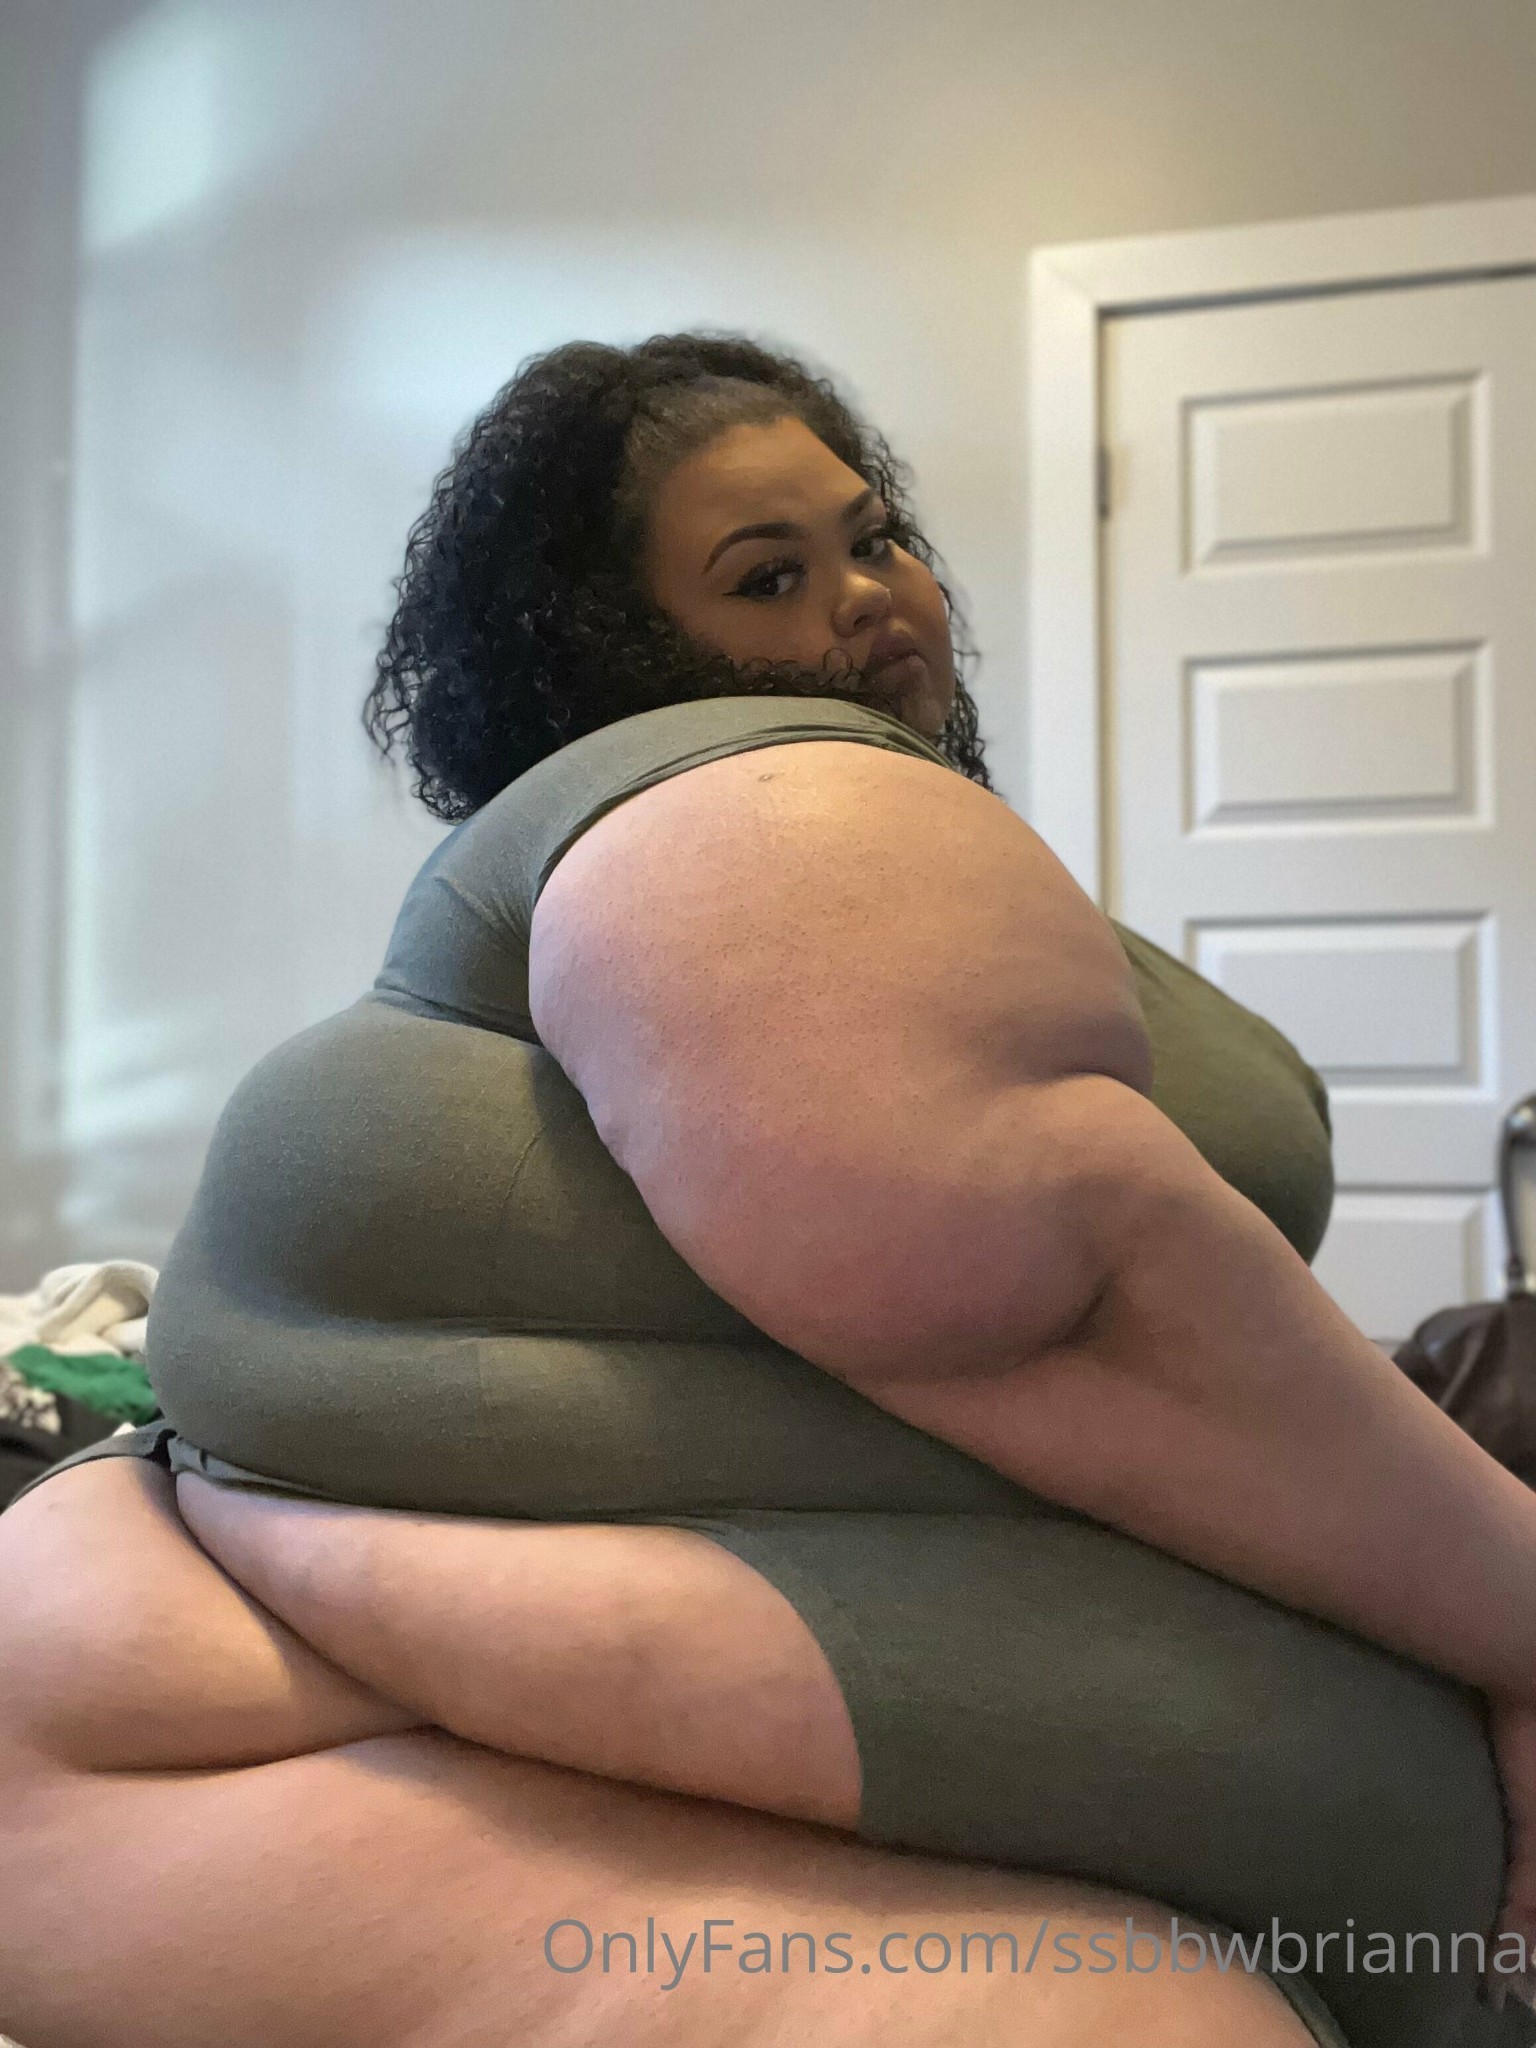 Sex onlyfats723:Ssbbw Brianna spilling out of pictures